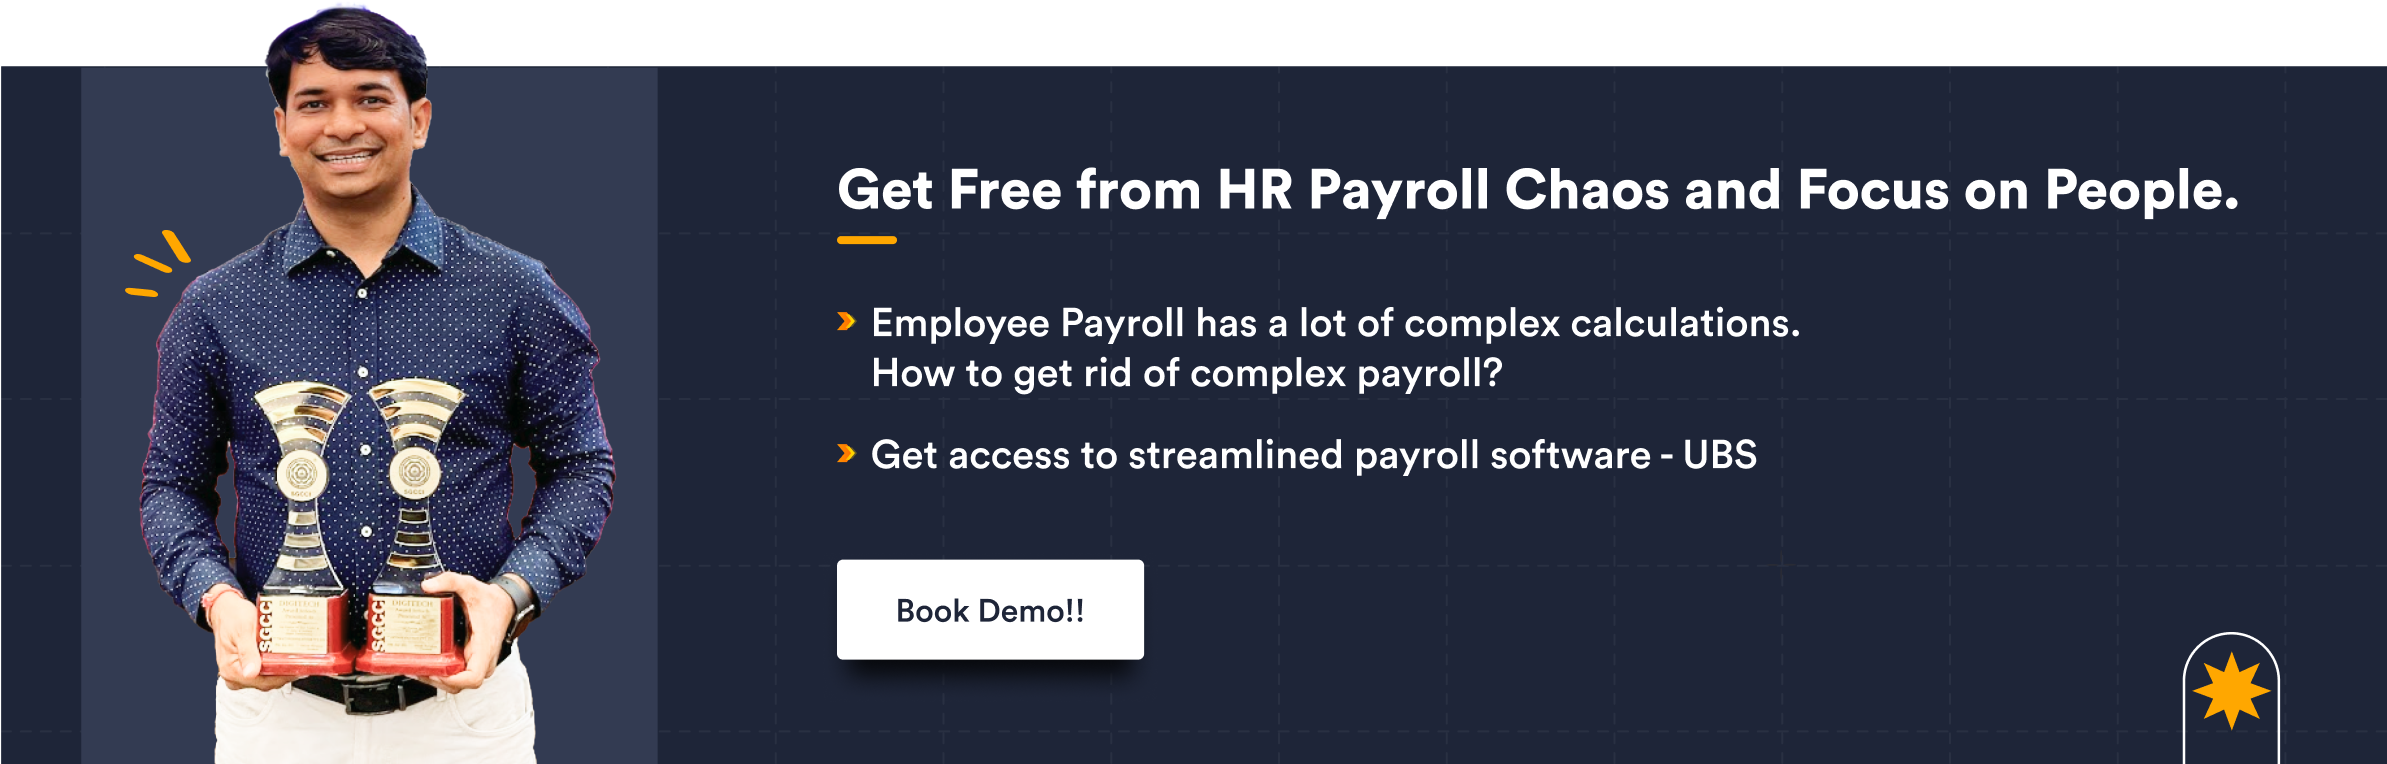 Get Free from HR Payroll Chaos and Focus on People. 1